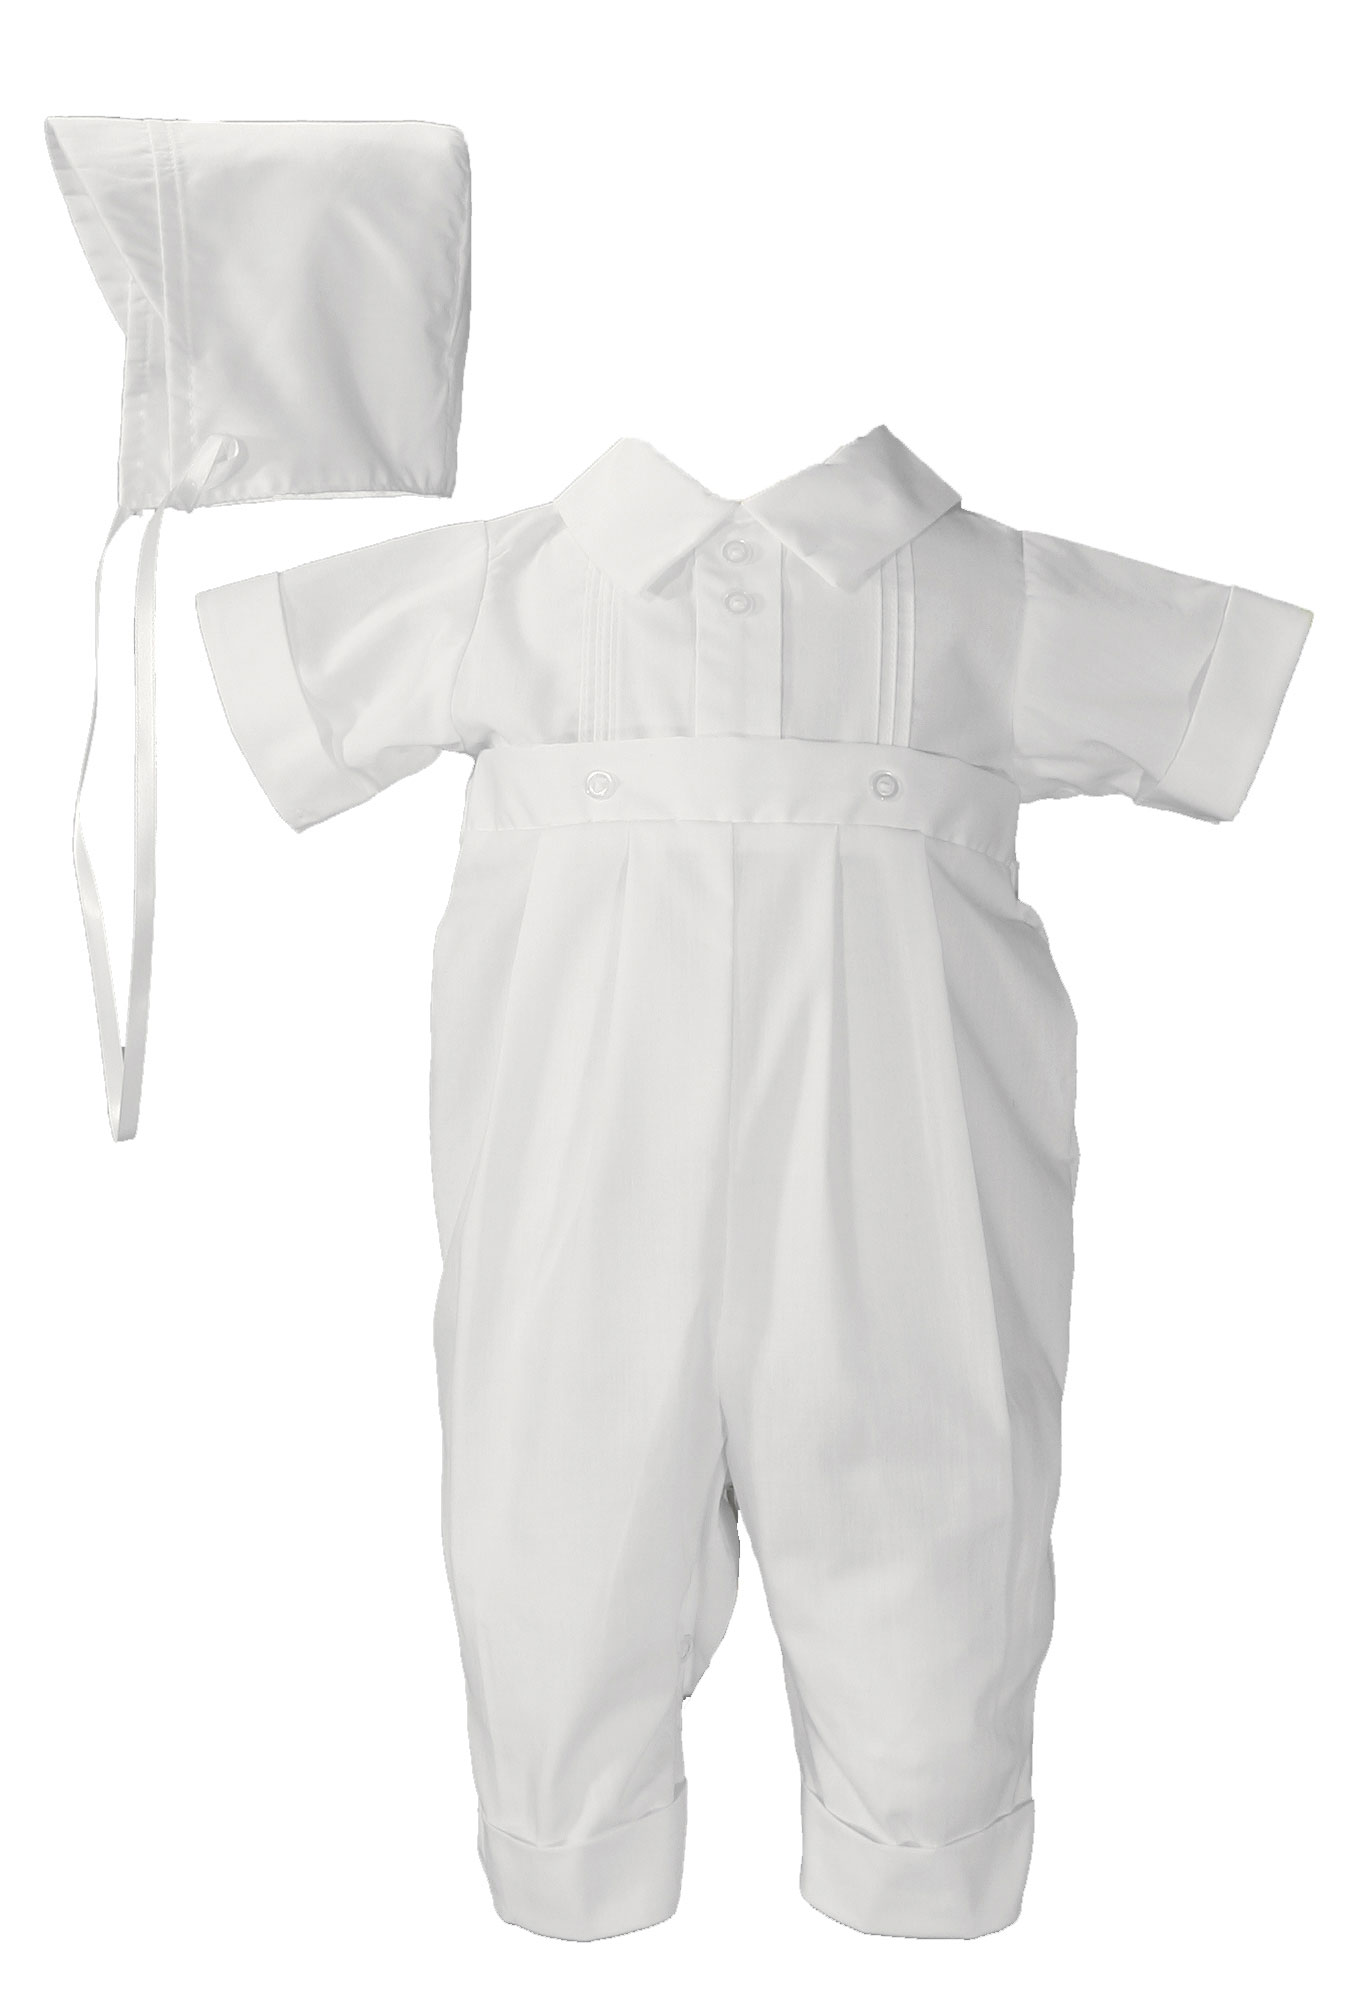 Boys Poly Cotton One Piece Christening Baptism Coverall with Pin Tucking - Little Things Mean a Lot